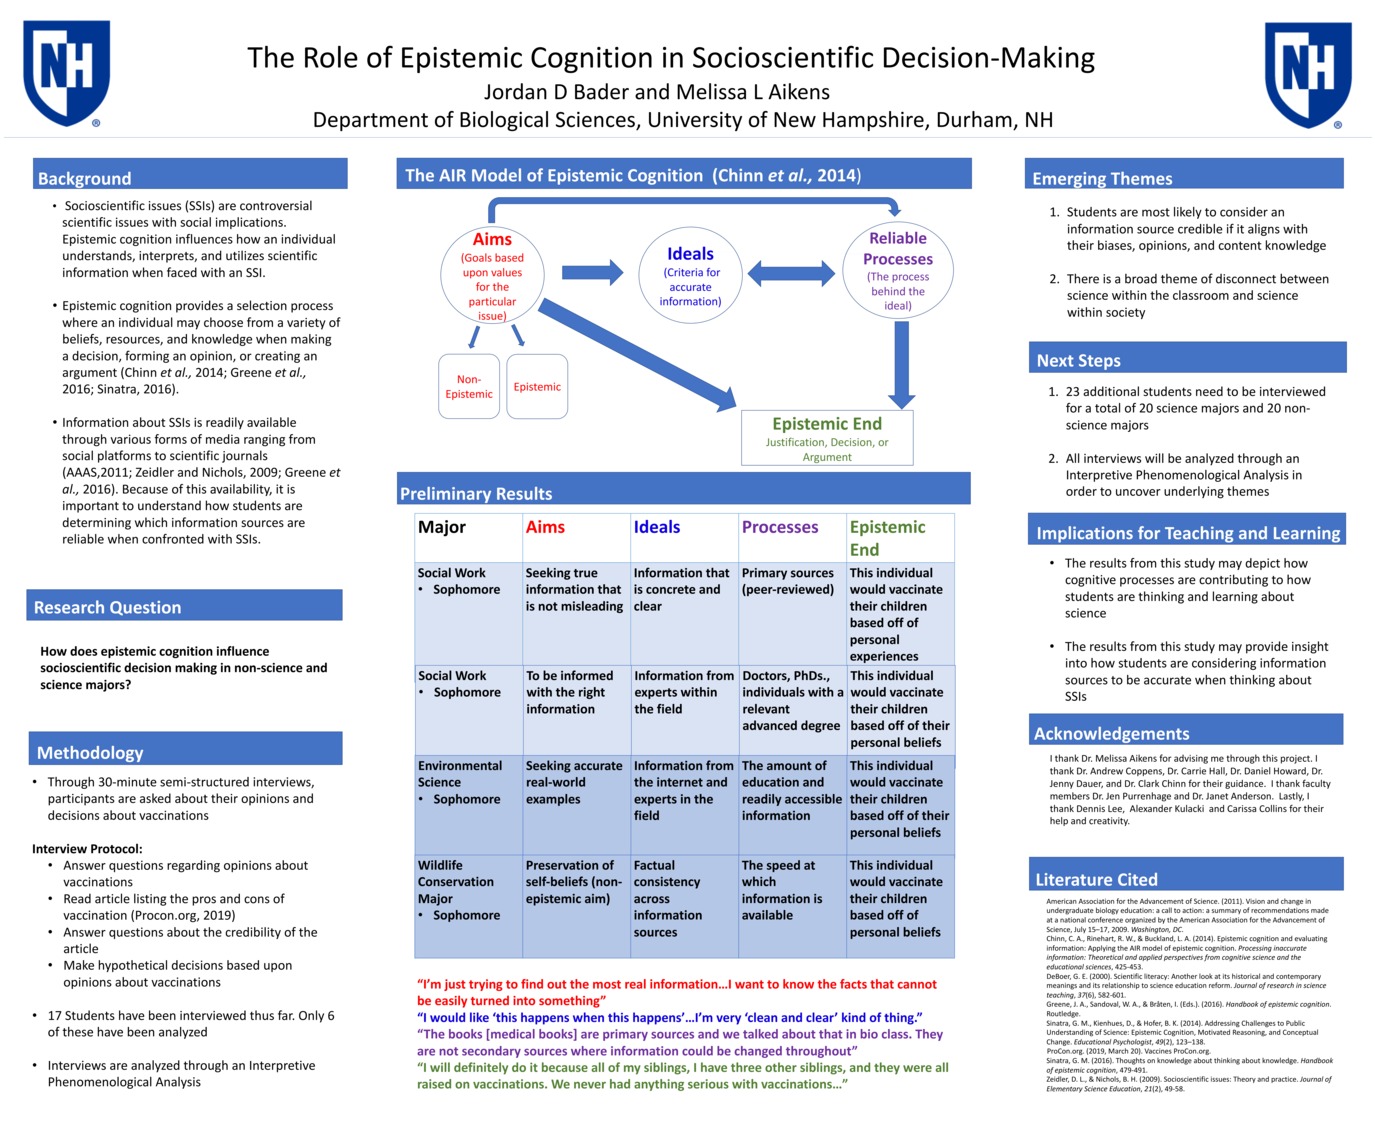 The Role Of Epistemic Cognition In Socioscientific Decision-Making by Jb1410